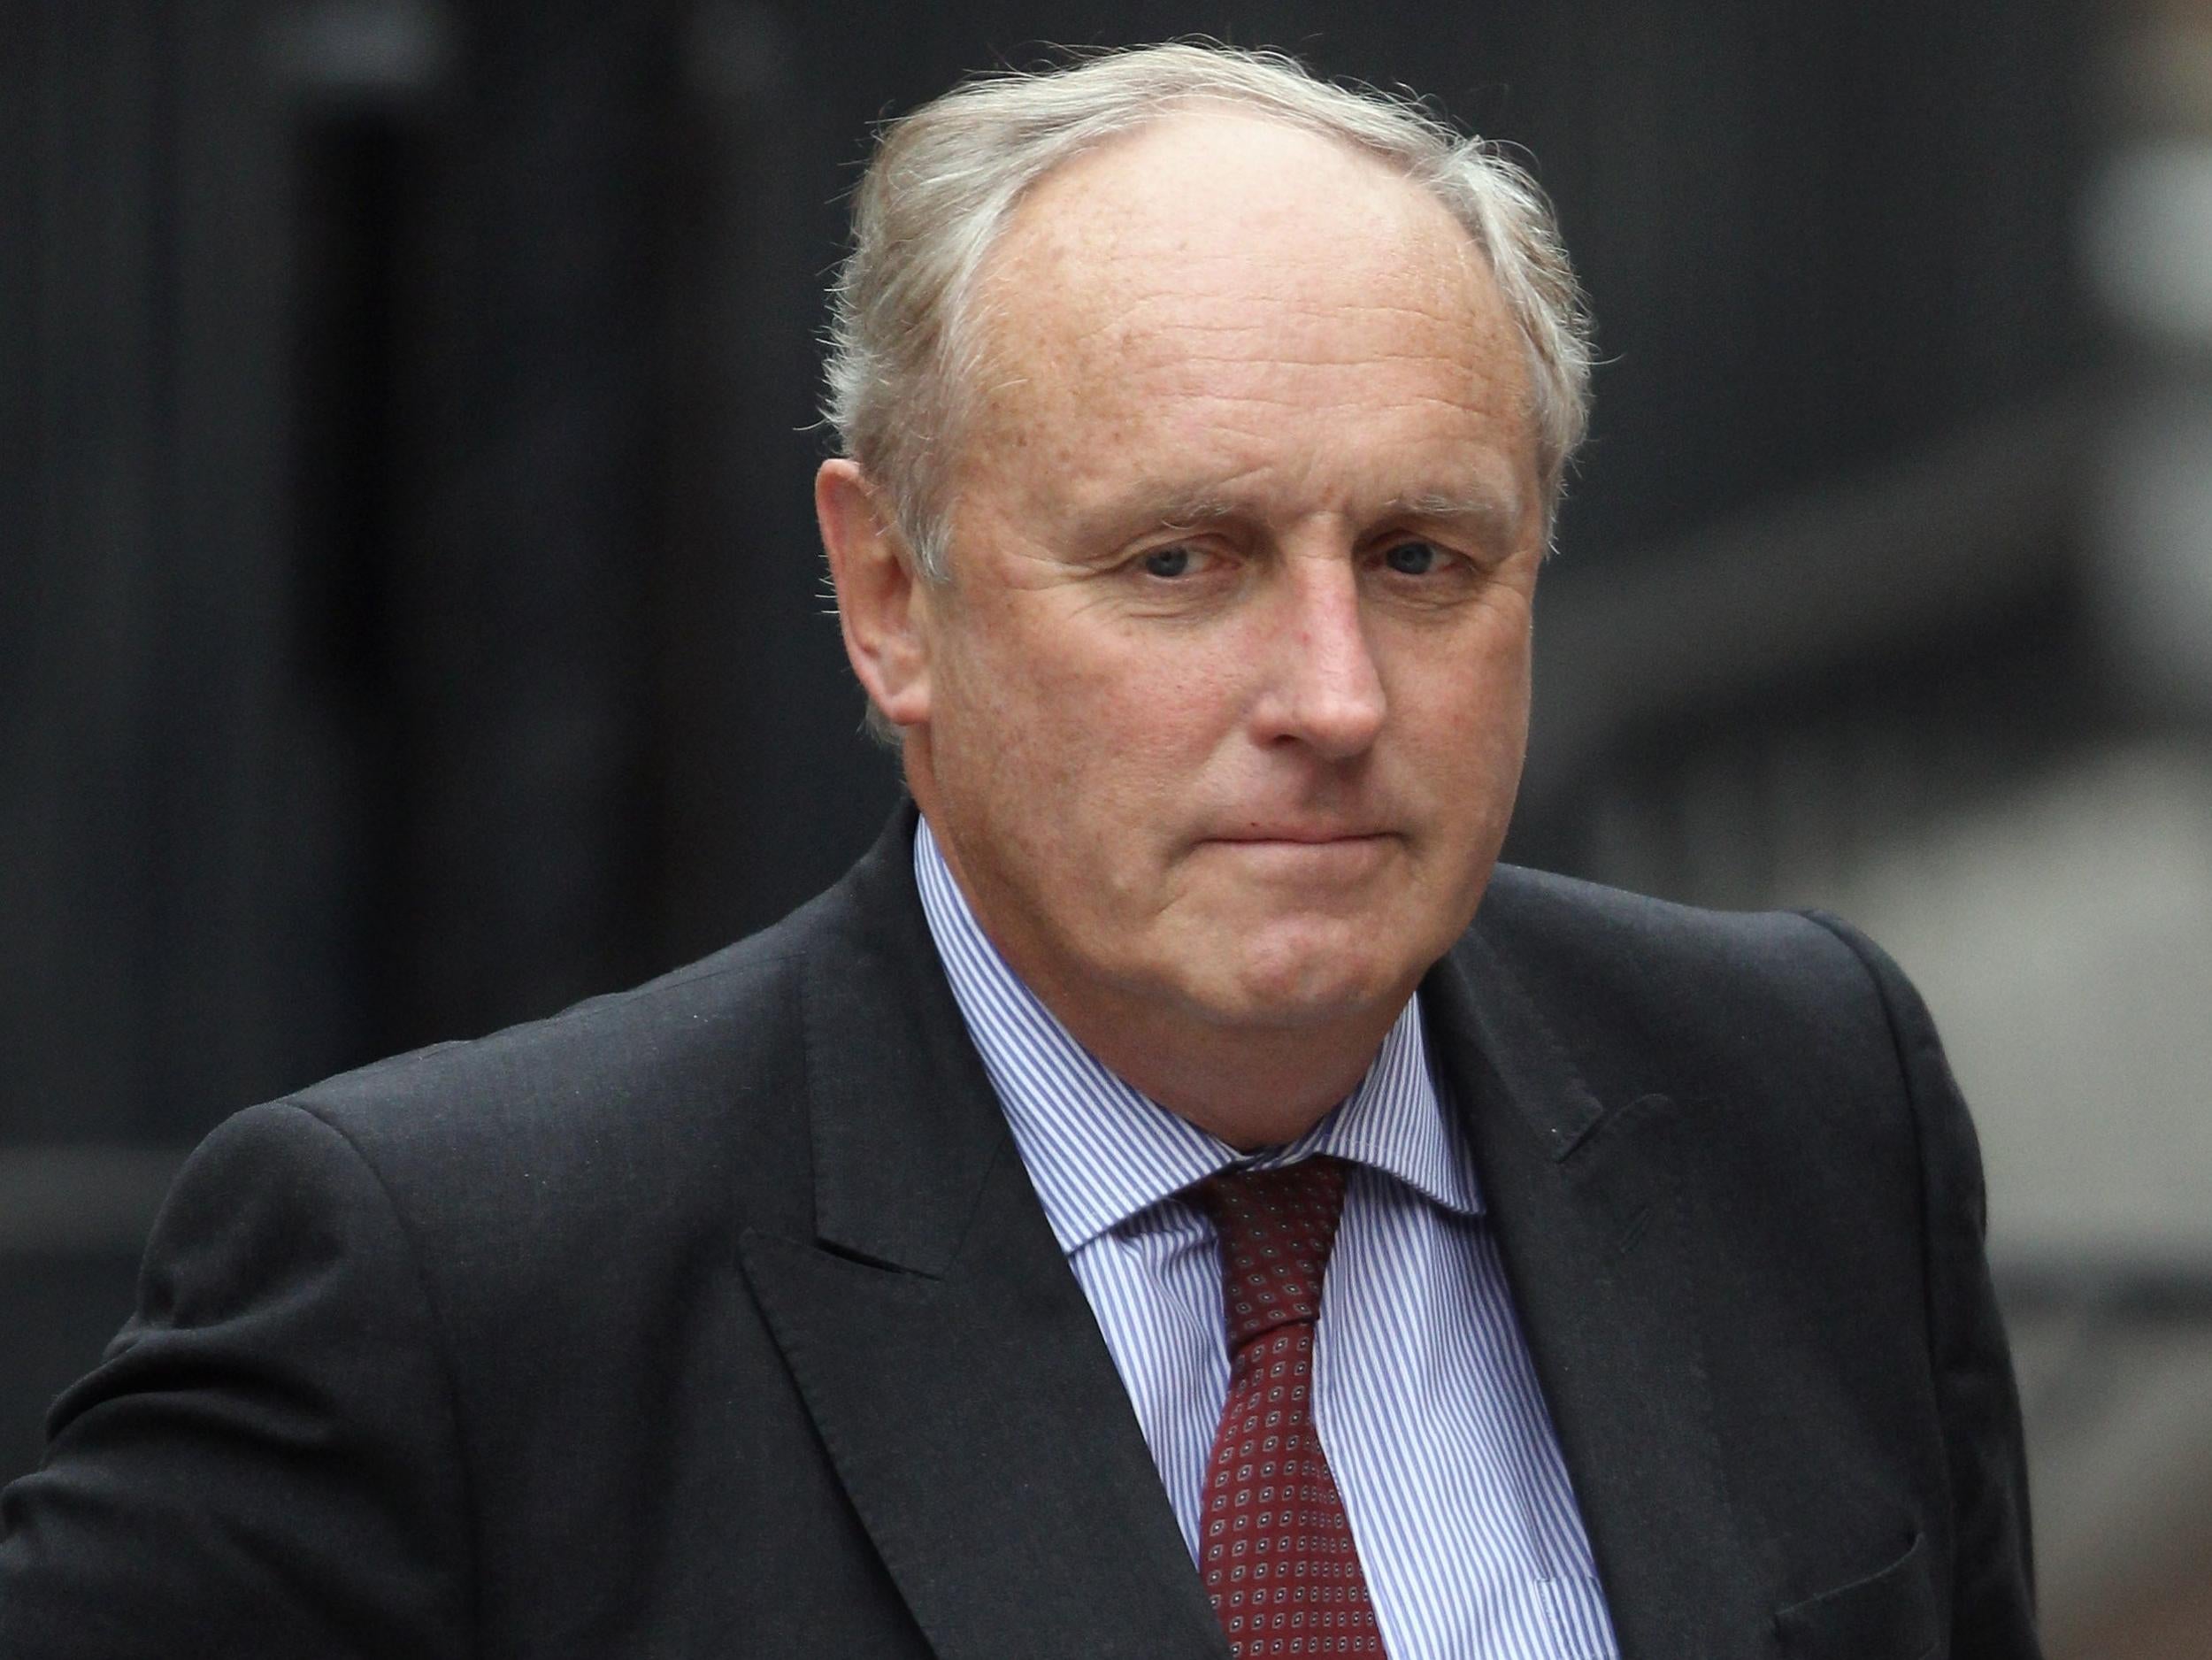 <p>Paul Dacre had reportedly been asked by the PM to put himself up as a candidate to take charge of Ofcom</p>